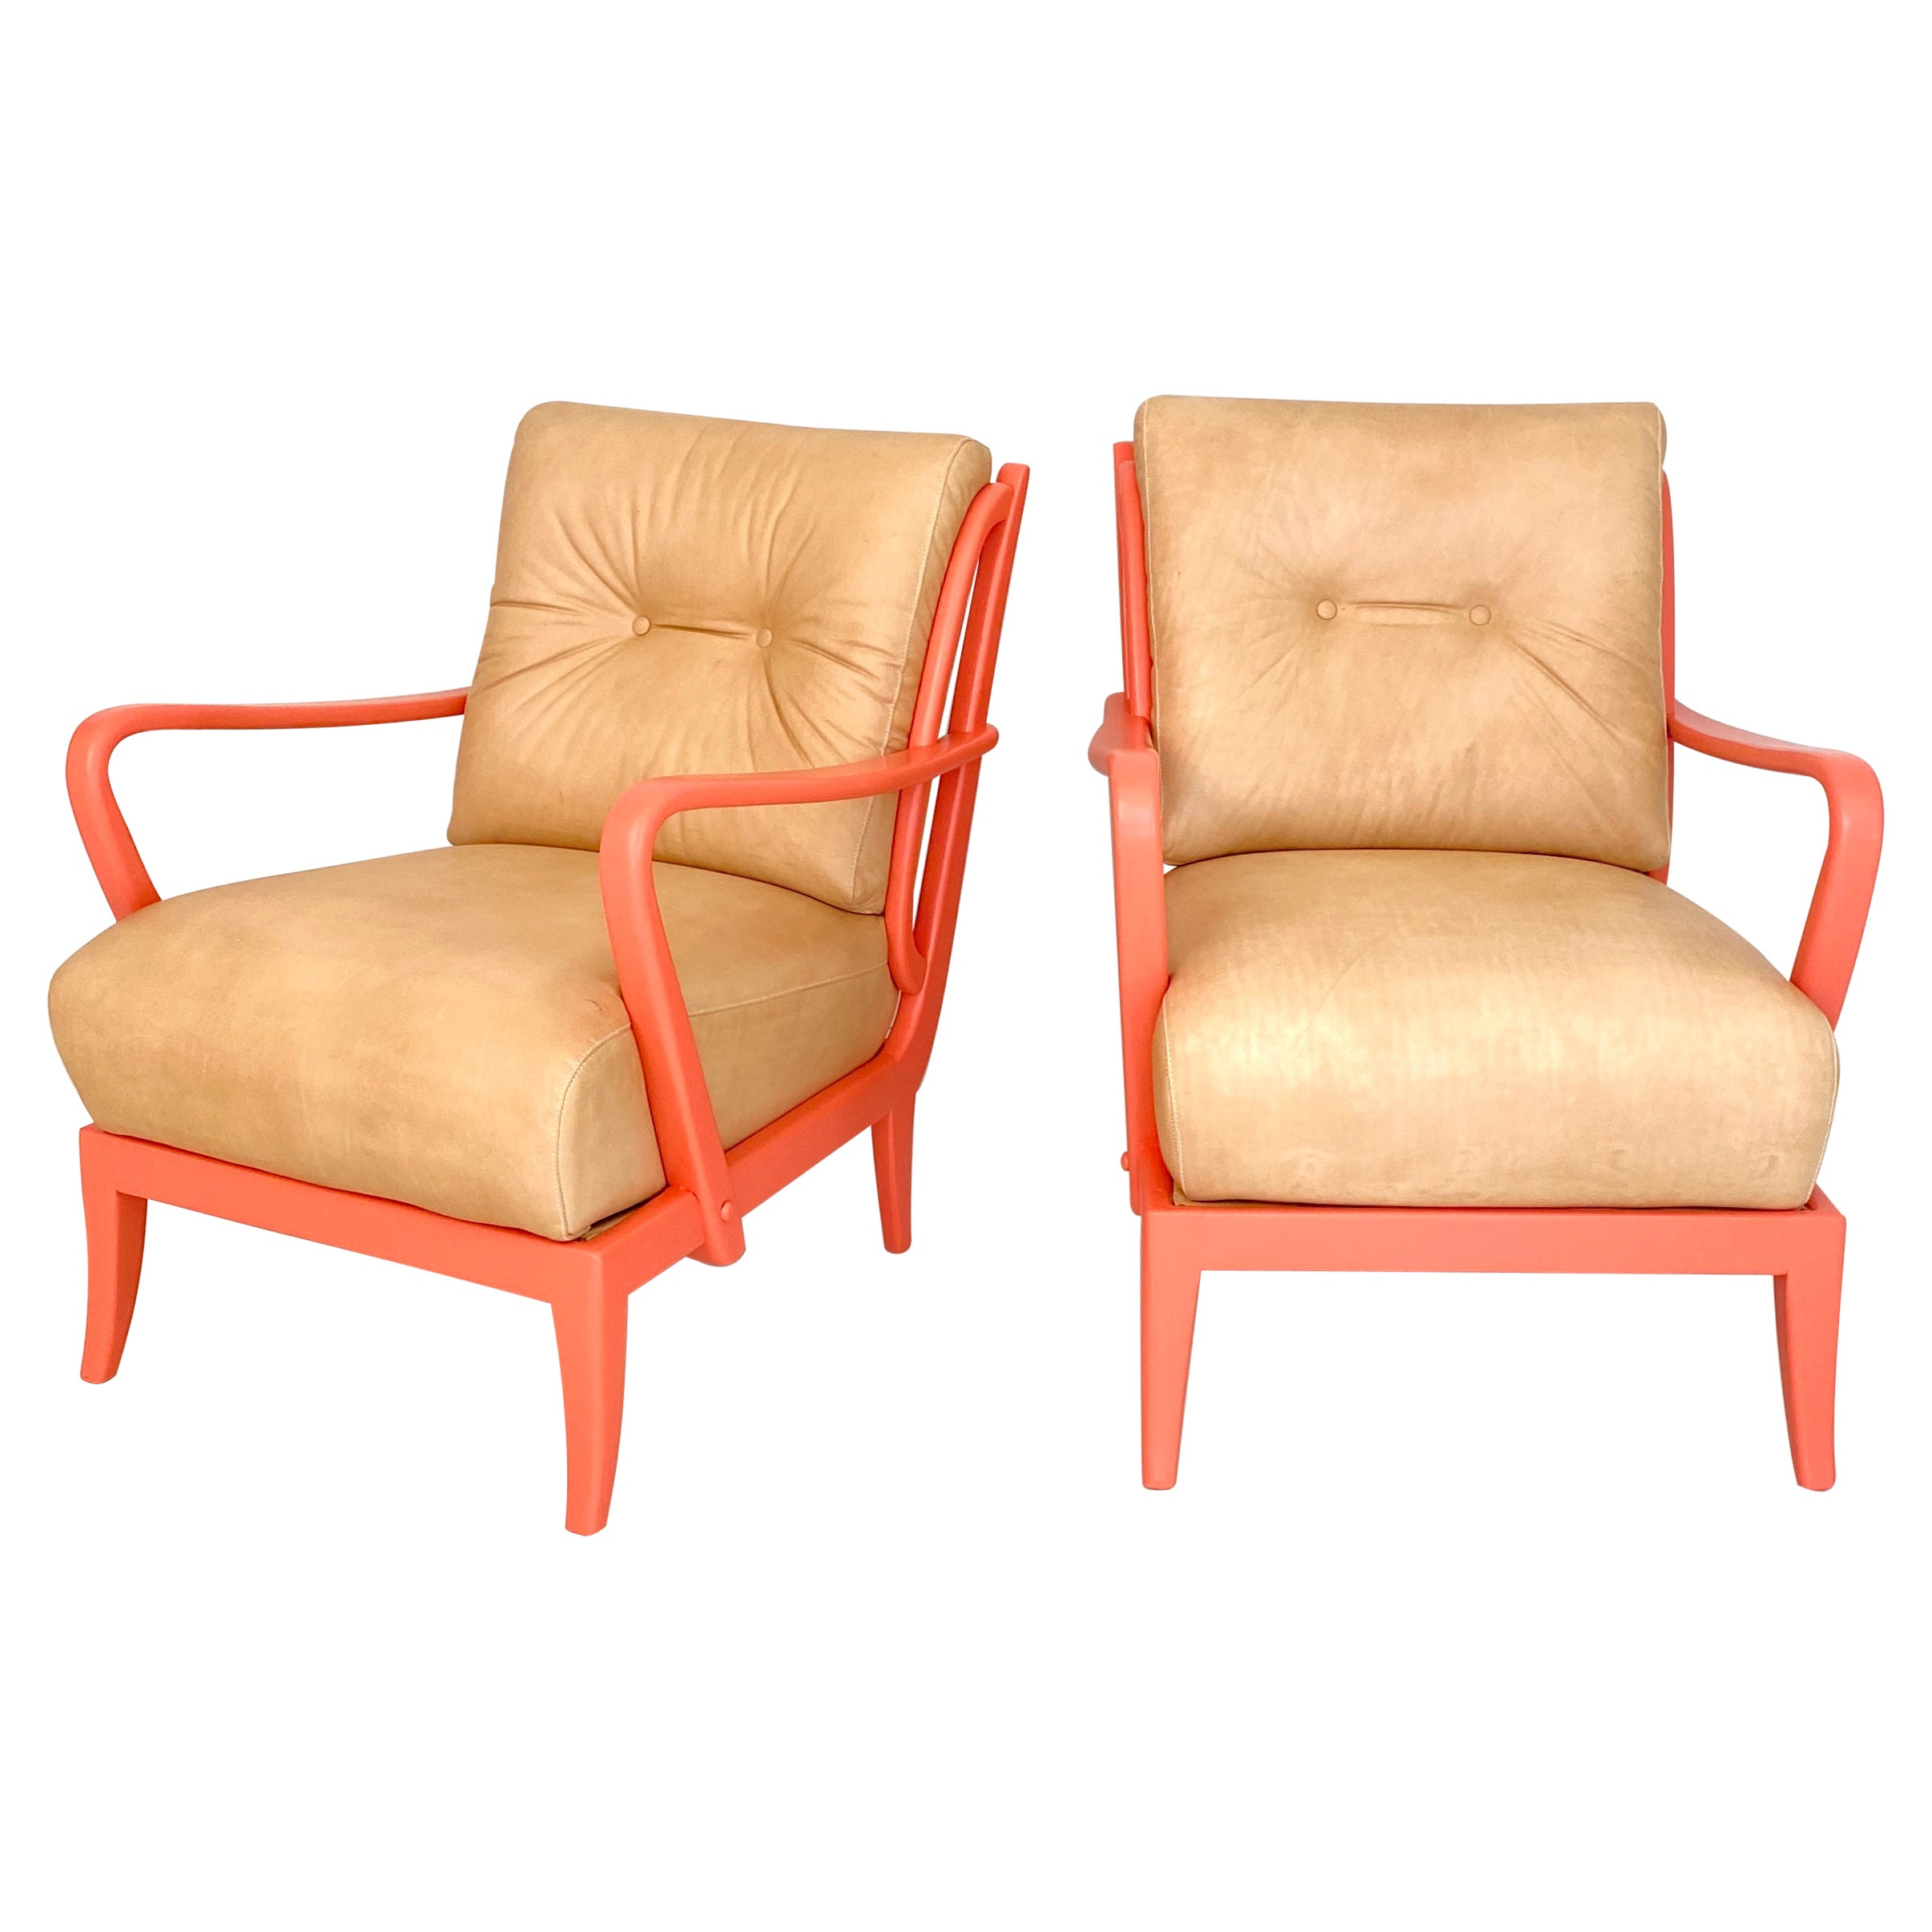 Pair of Italian Mid Century Lounge Chairs in Coral Color and Beige Leather, 1950